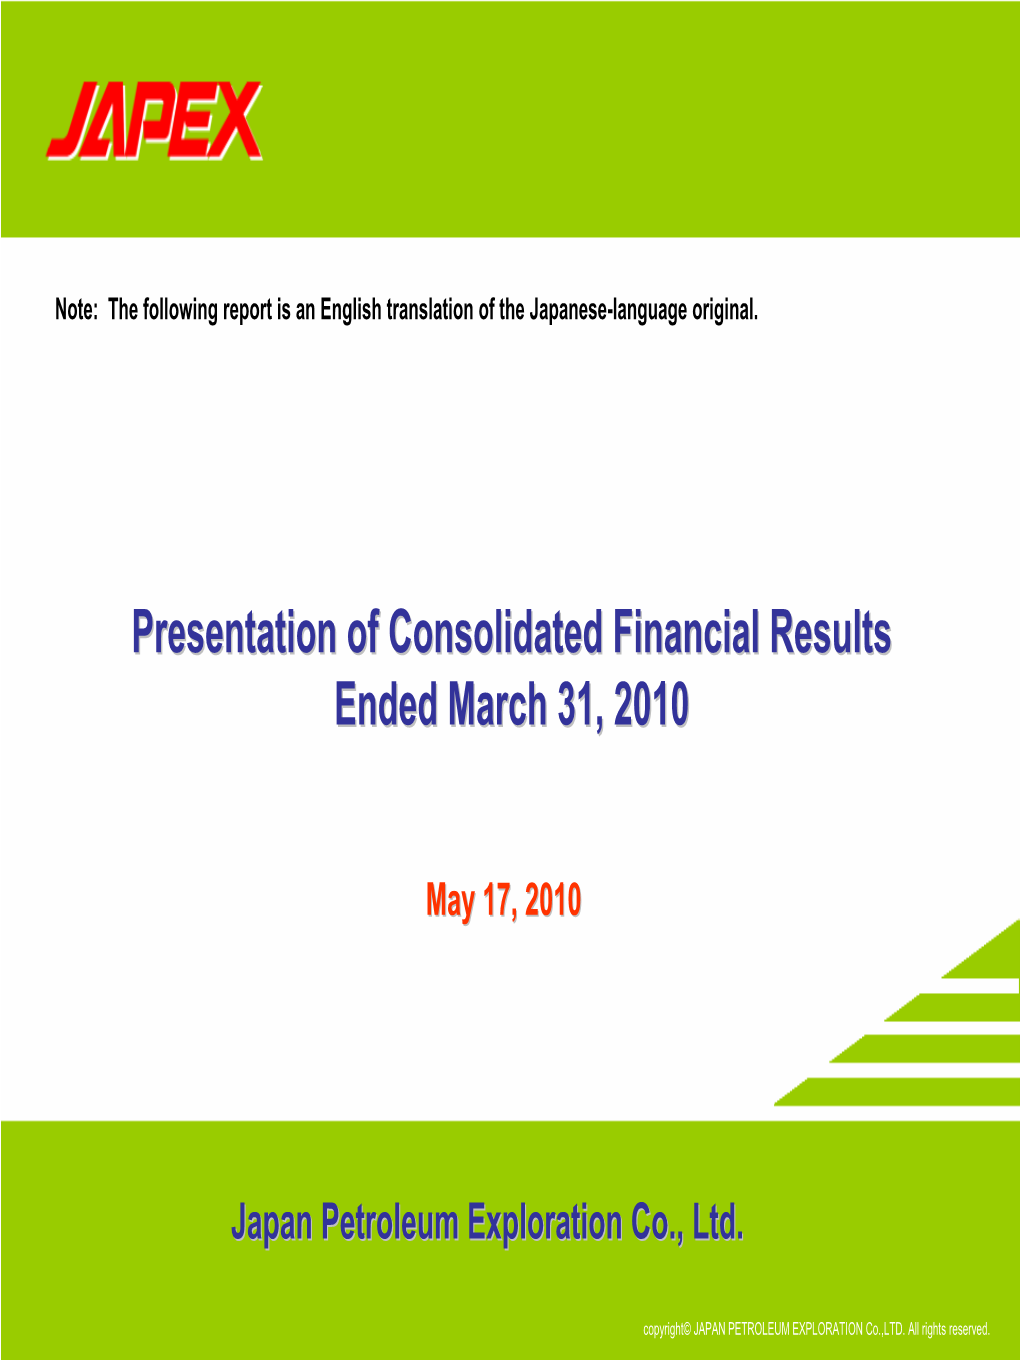 Presentation of Consolidated Financial Results Ended March 31, 2010